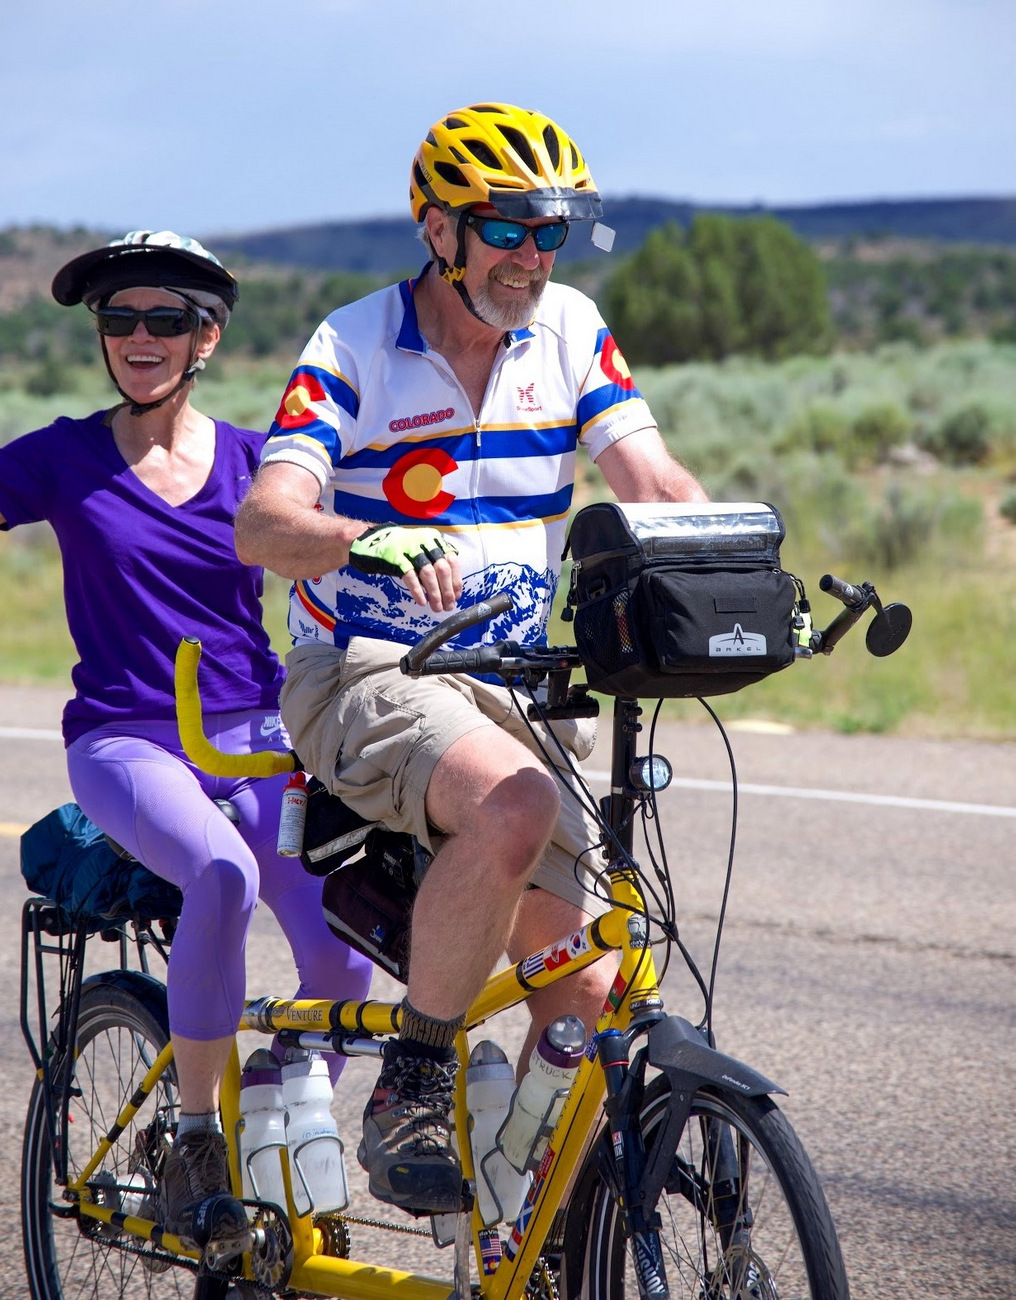 A live action photo of Terry and Dennis Struck riding the Bee on UT-18 (DaVinci Tandem; Photo by Julianna / Backroads Guide).